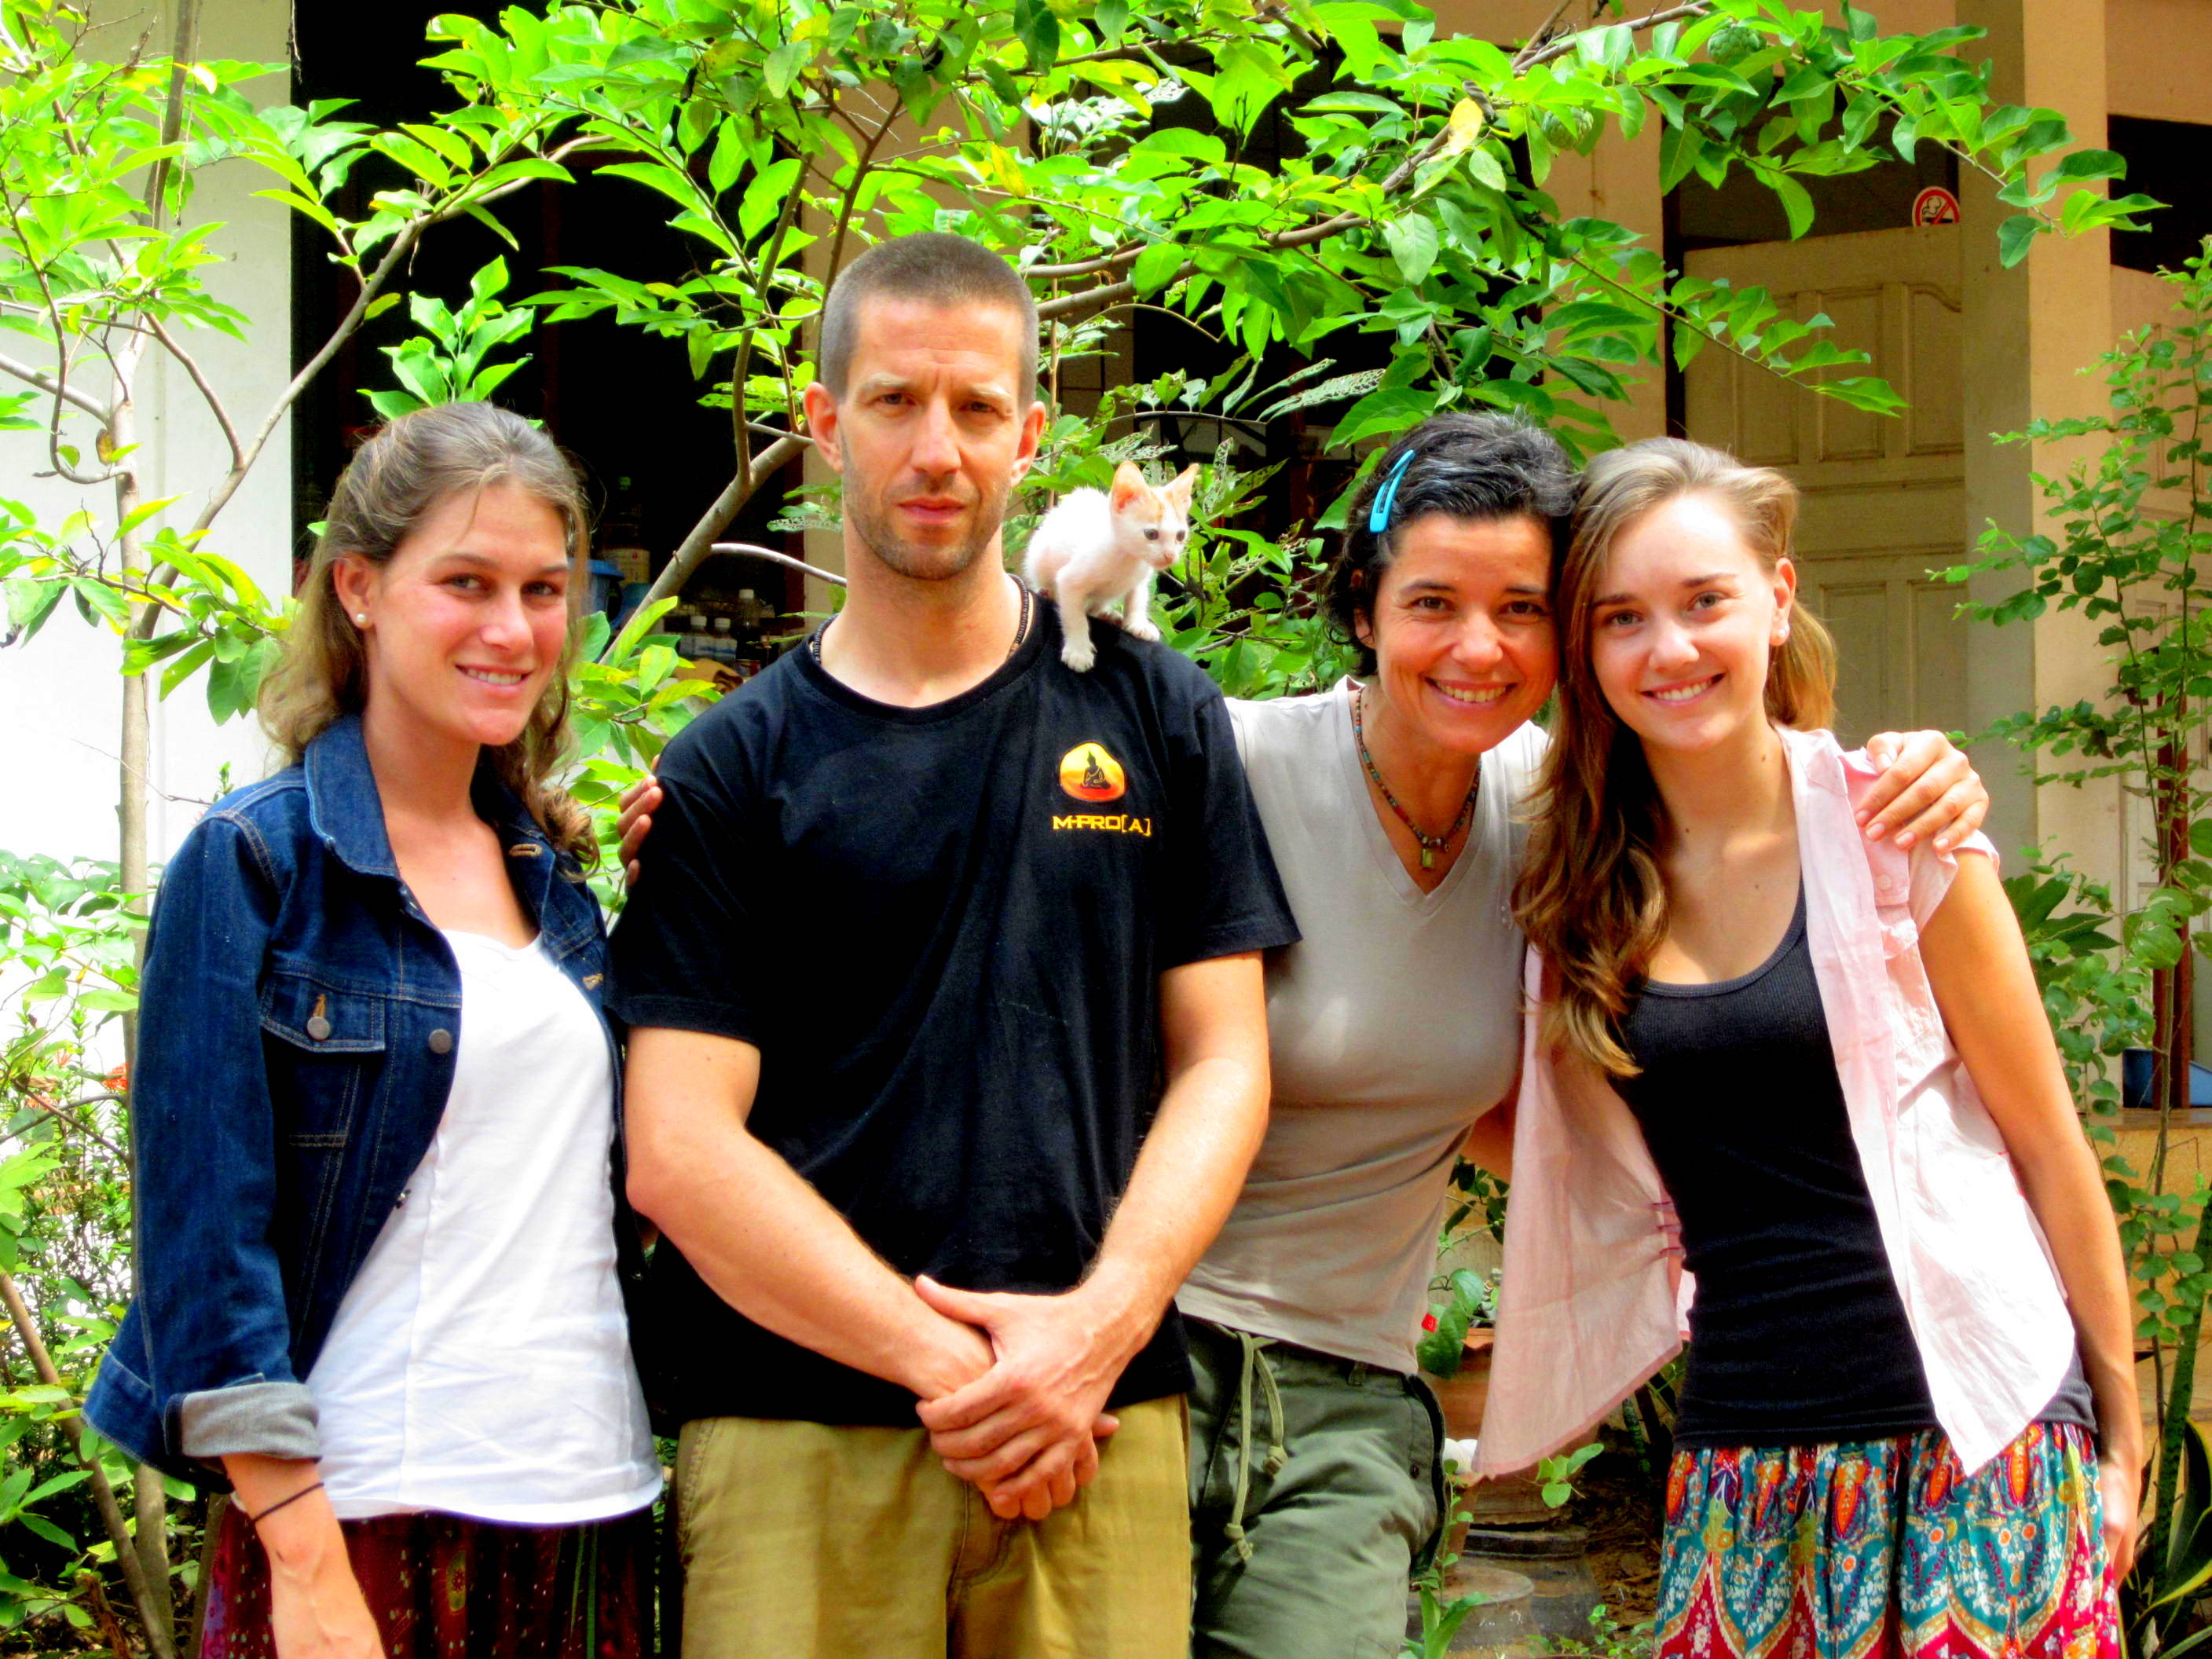 Nicole and I with Christian and Anja, the leaders of the Mindfulness Project in Khon Kaen, Thailand